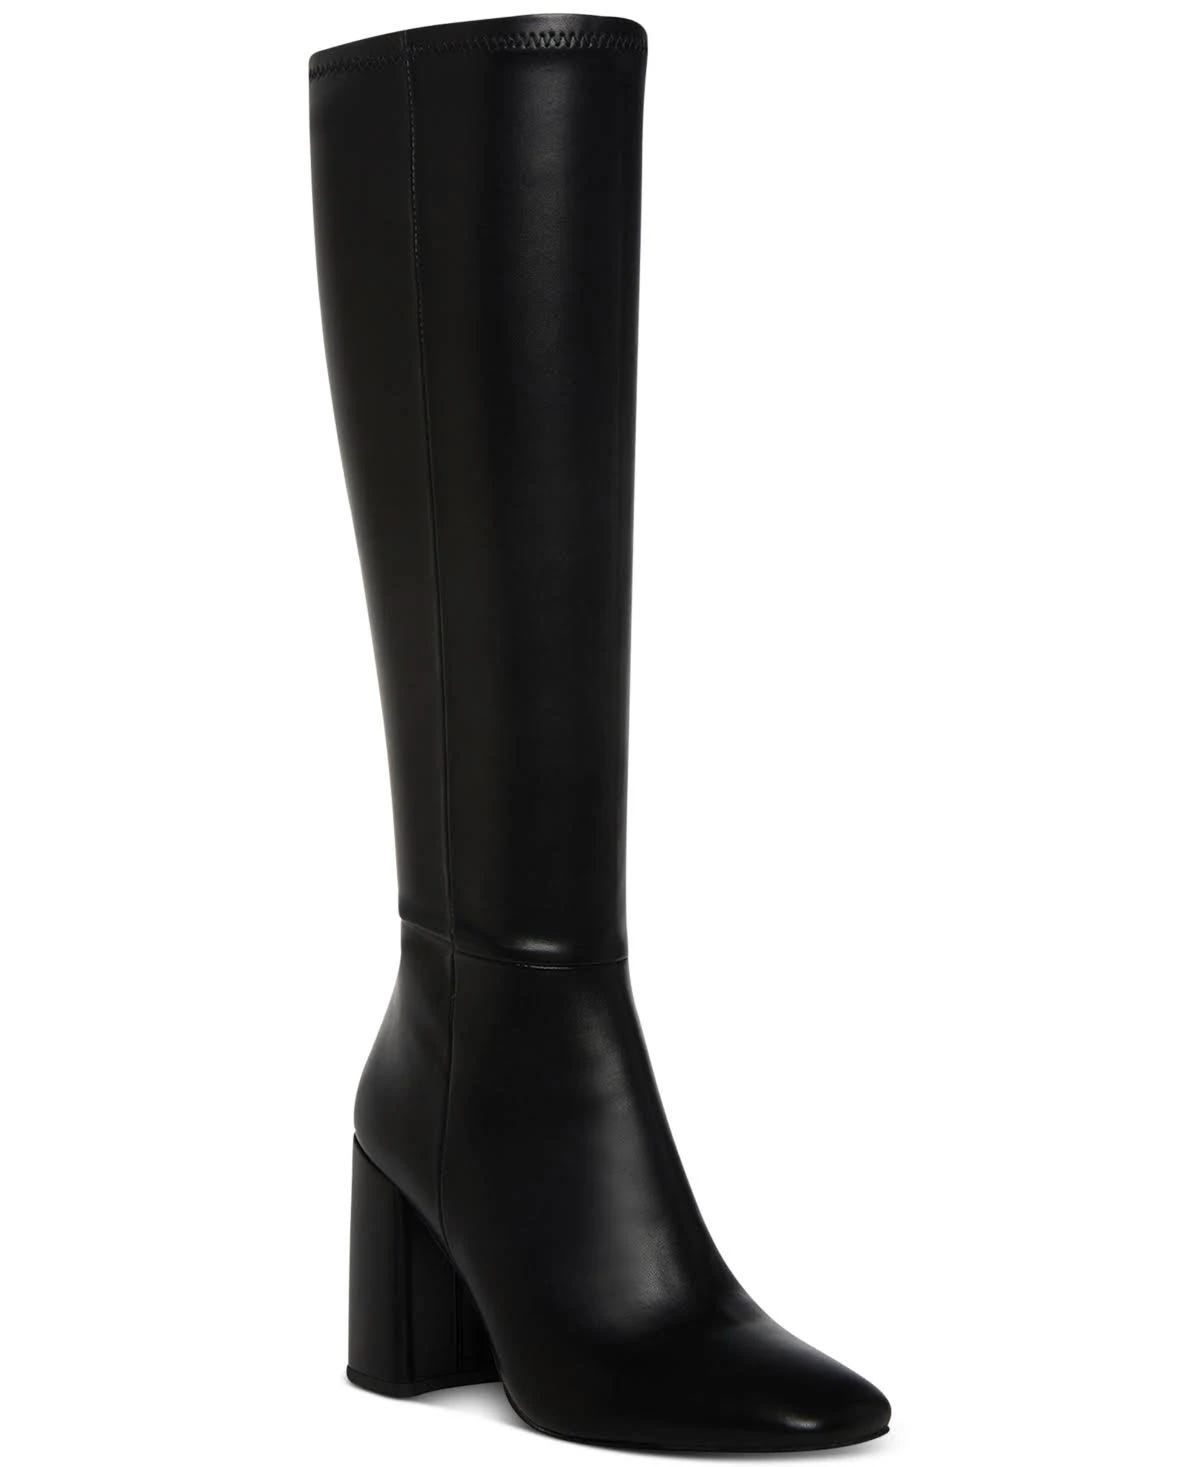 Square-toe Knee-High Boot with Padded Footbed | Image